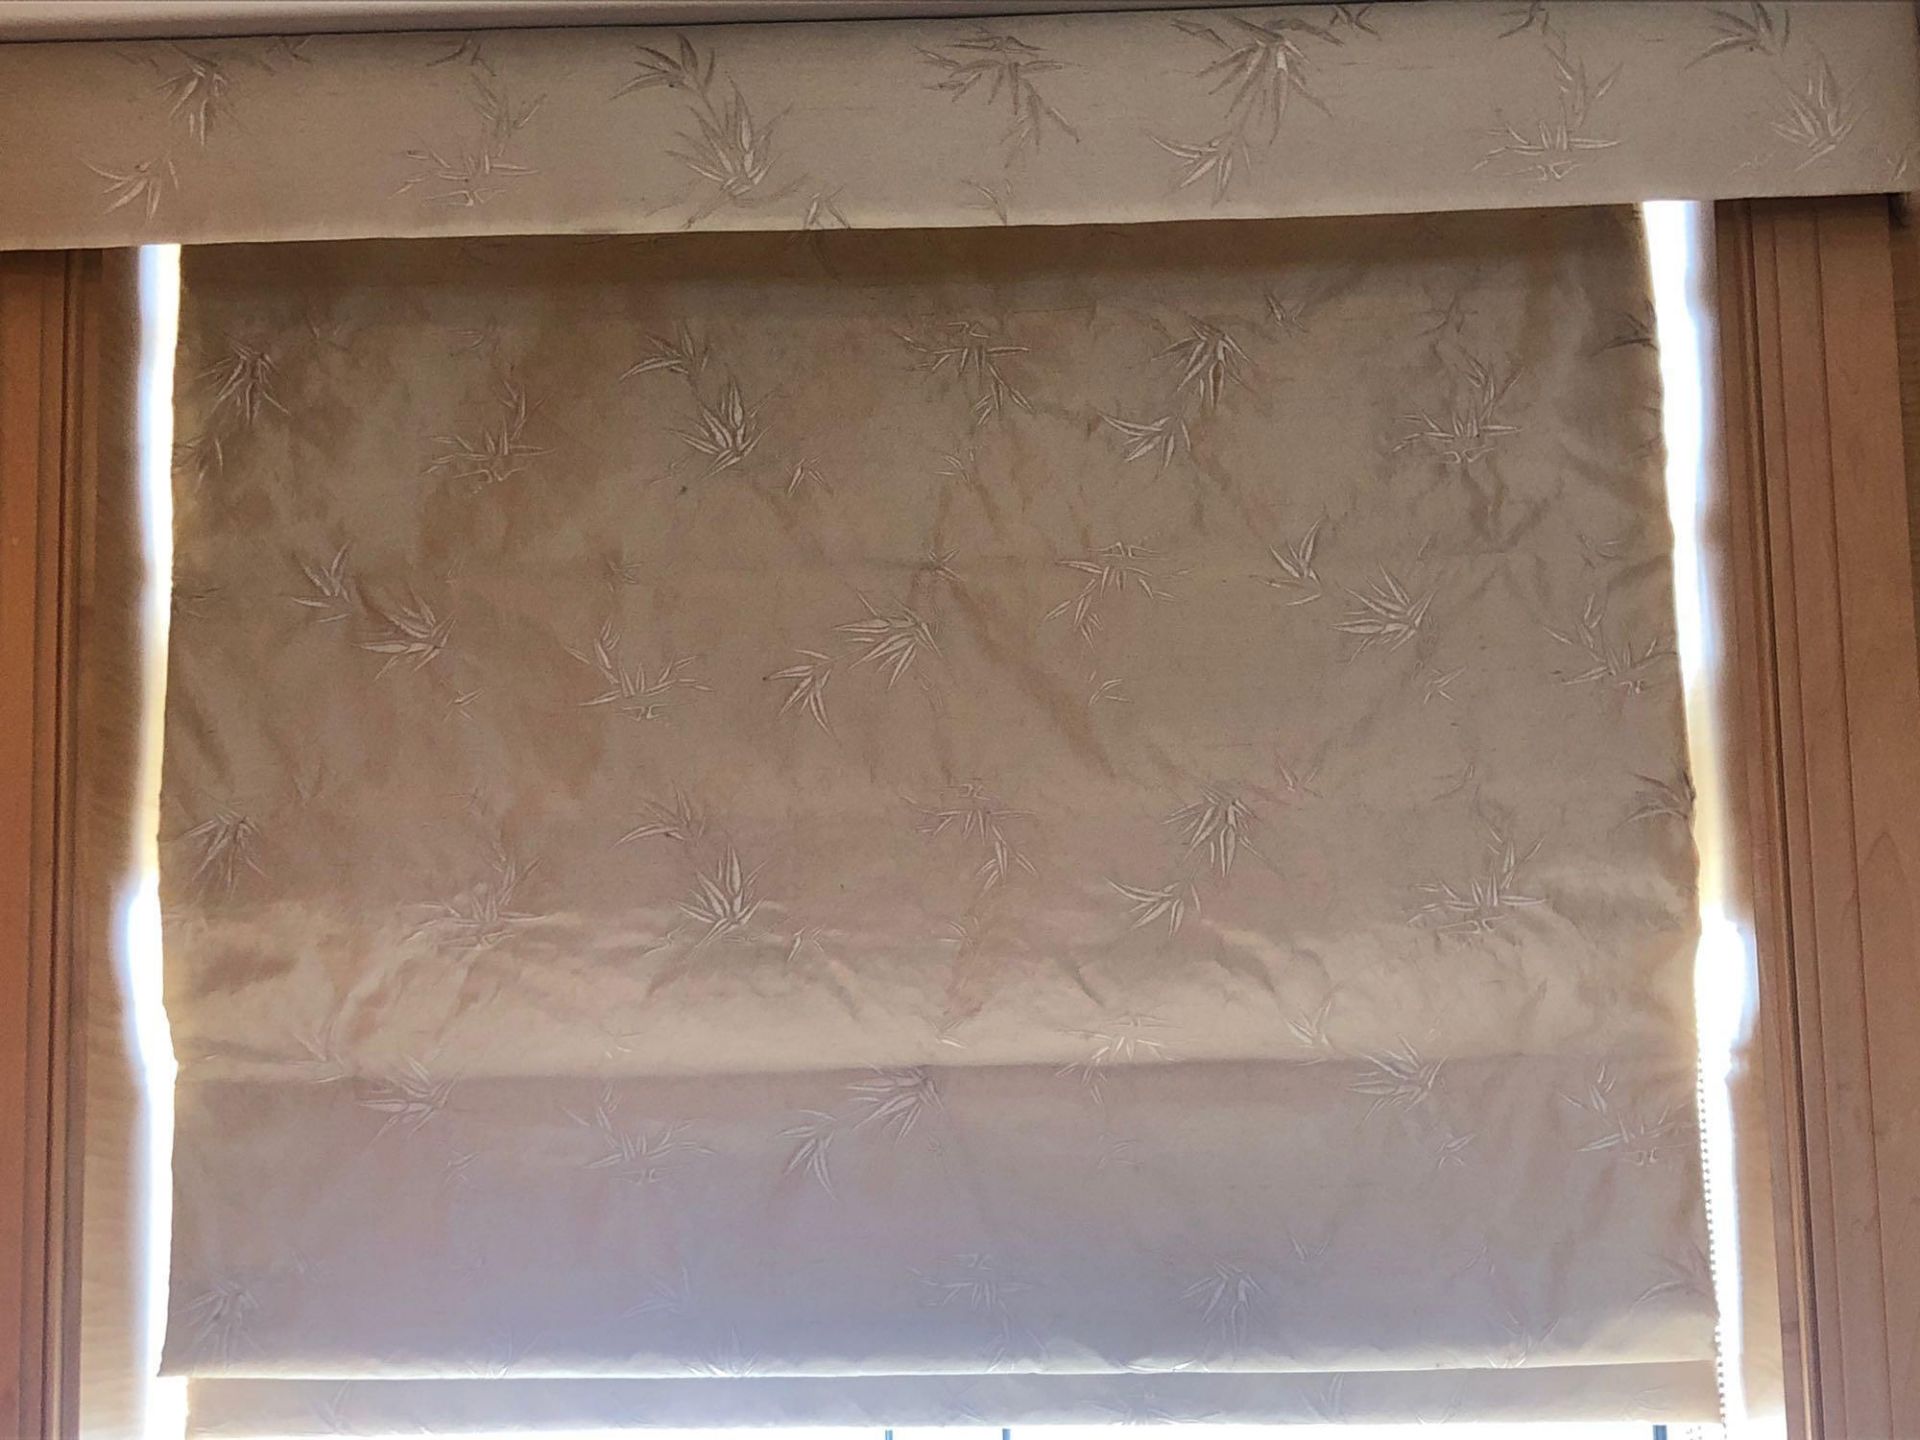 Cream Silk Roman Blind With Leaf Pattern And Small Pelmet 96 x 130cm (The Audley ) - Image 2 of 2